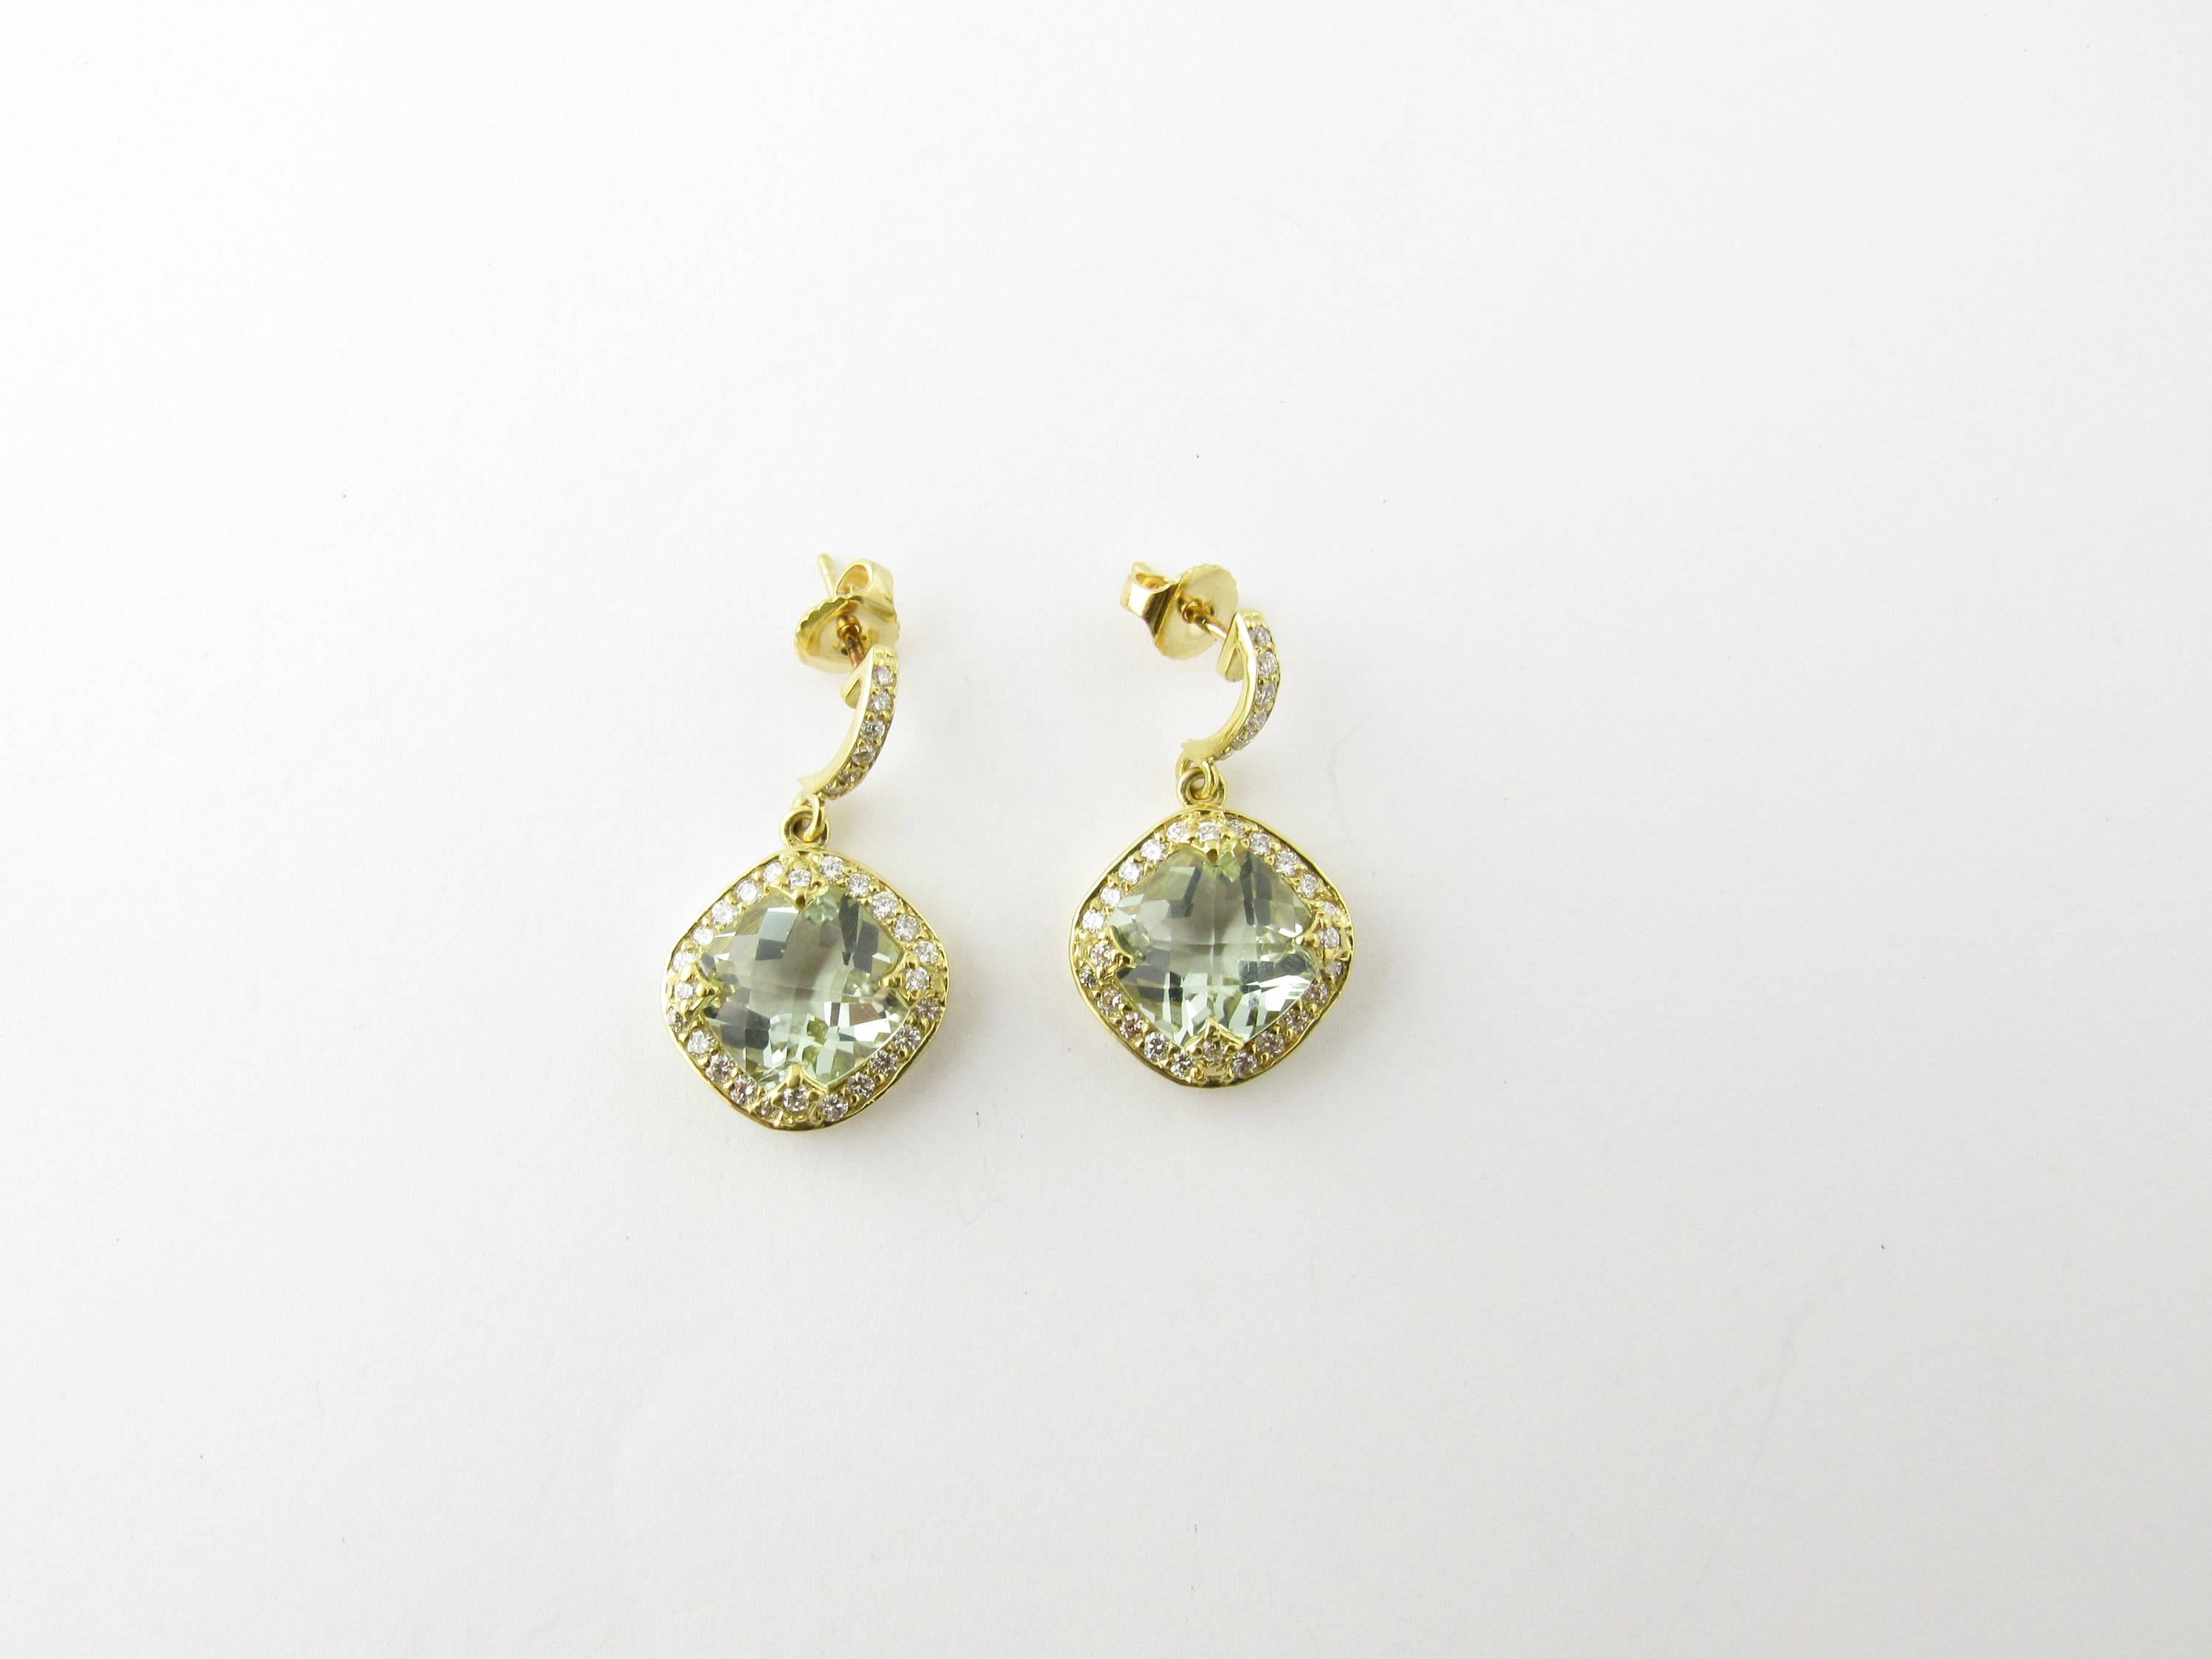 Vintage 18 Karat Yellow Gold Aquamarine and Diamond Earrings- 
These stunning dangling earrings each feature one square genuine aquamarine (10 mm x 10 mm) accented with 30 round brilliant cut diamonds and set in 18K yellow gold. 
Approximate total